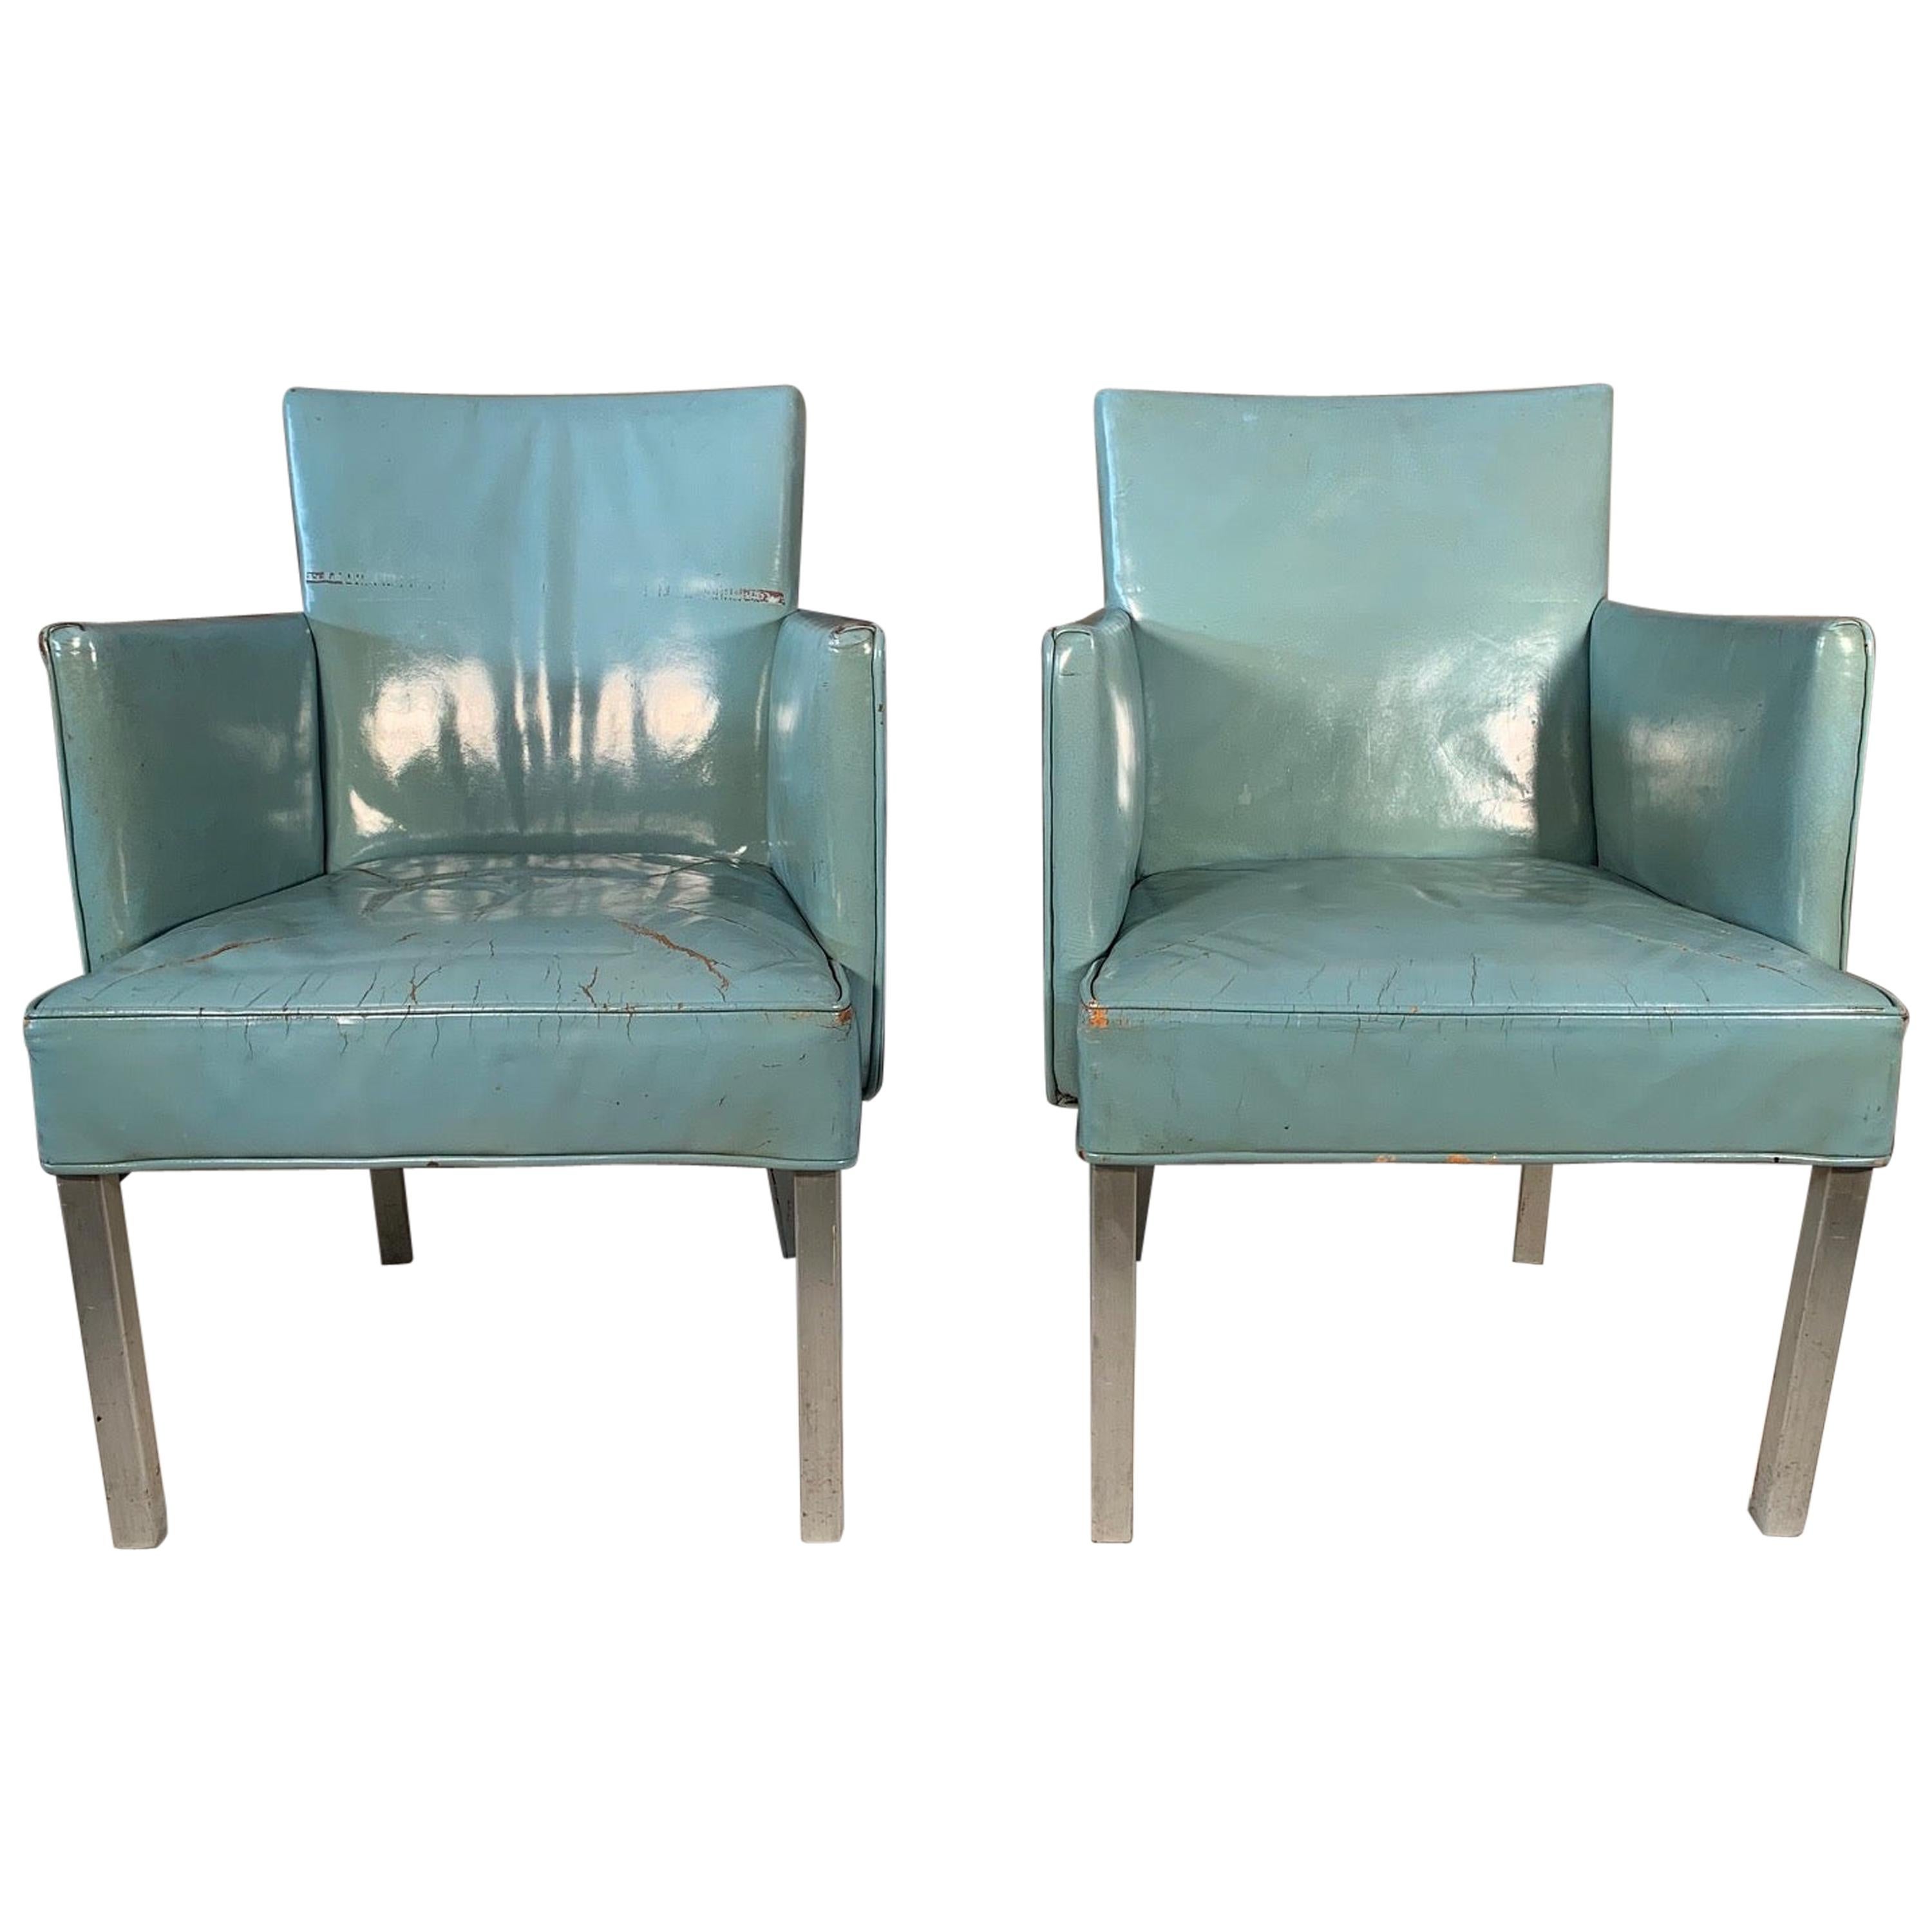 Pair of Unusual Armchairs from S.S. United States Ocean Liner For Sale